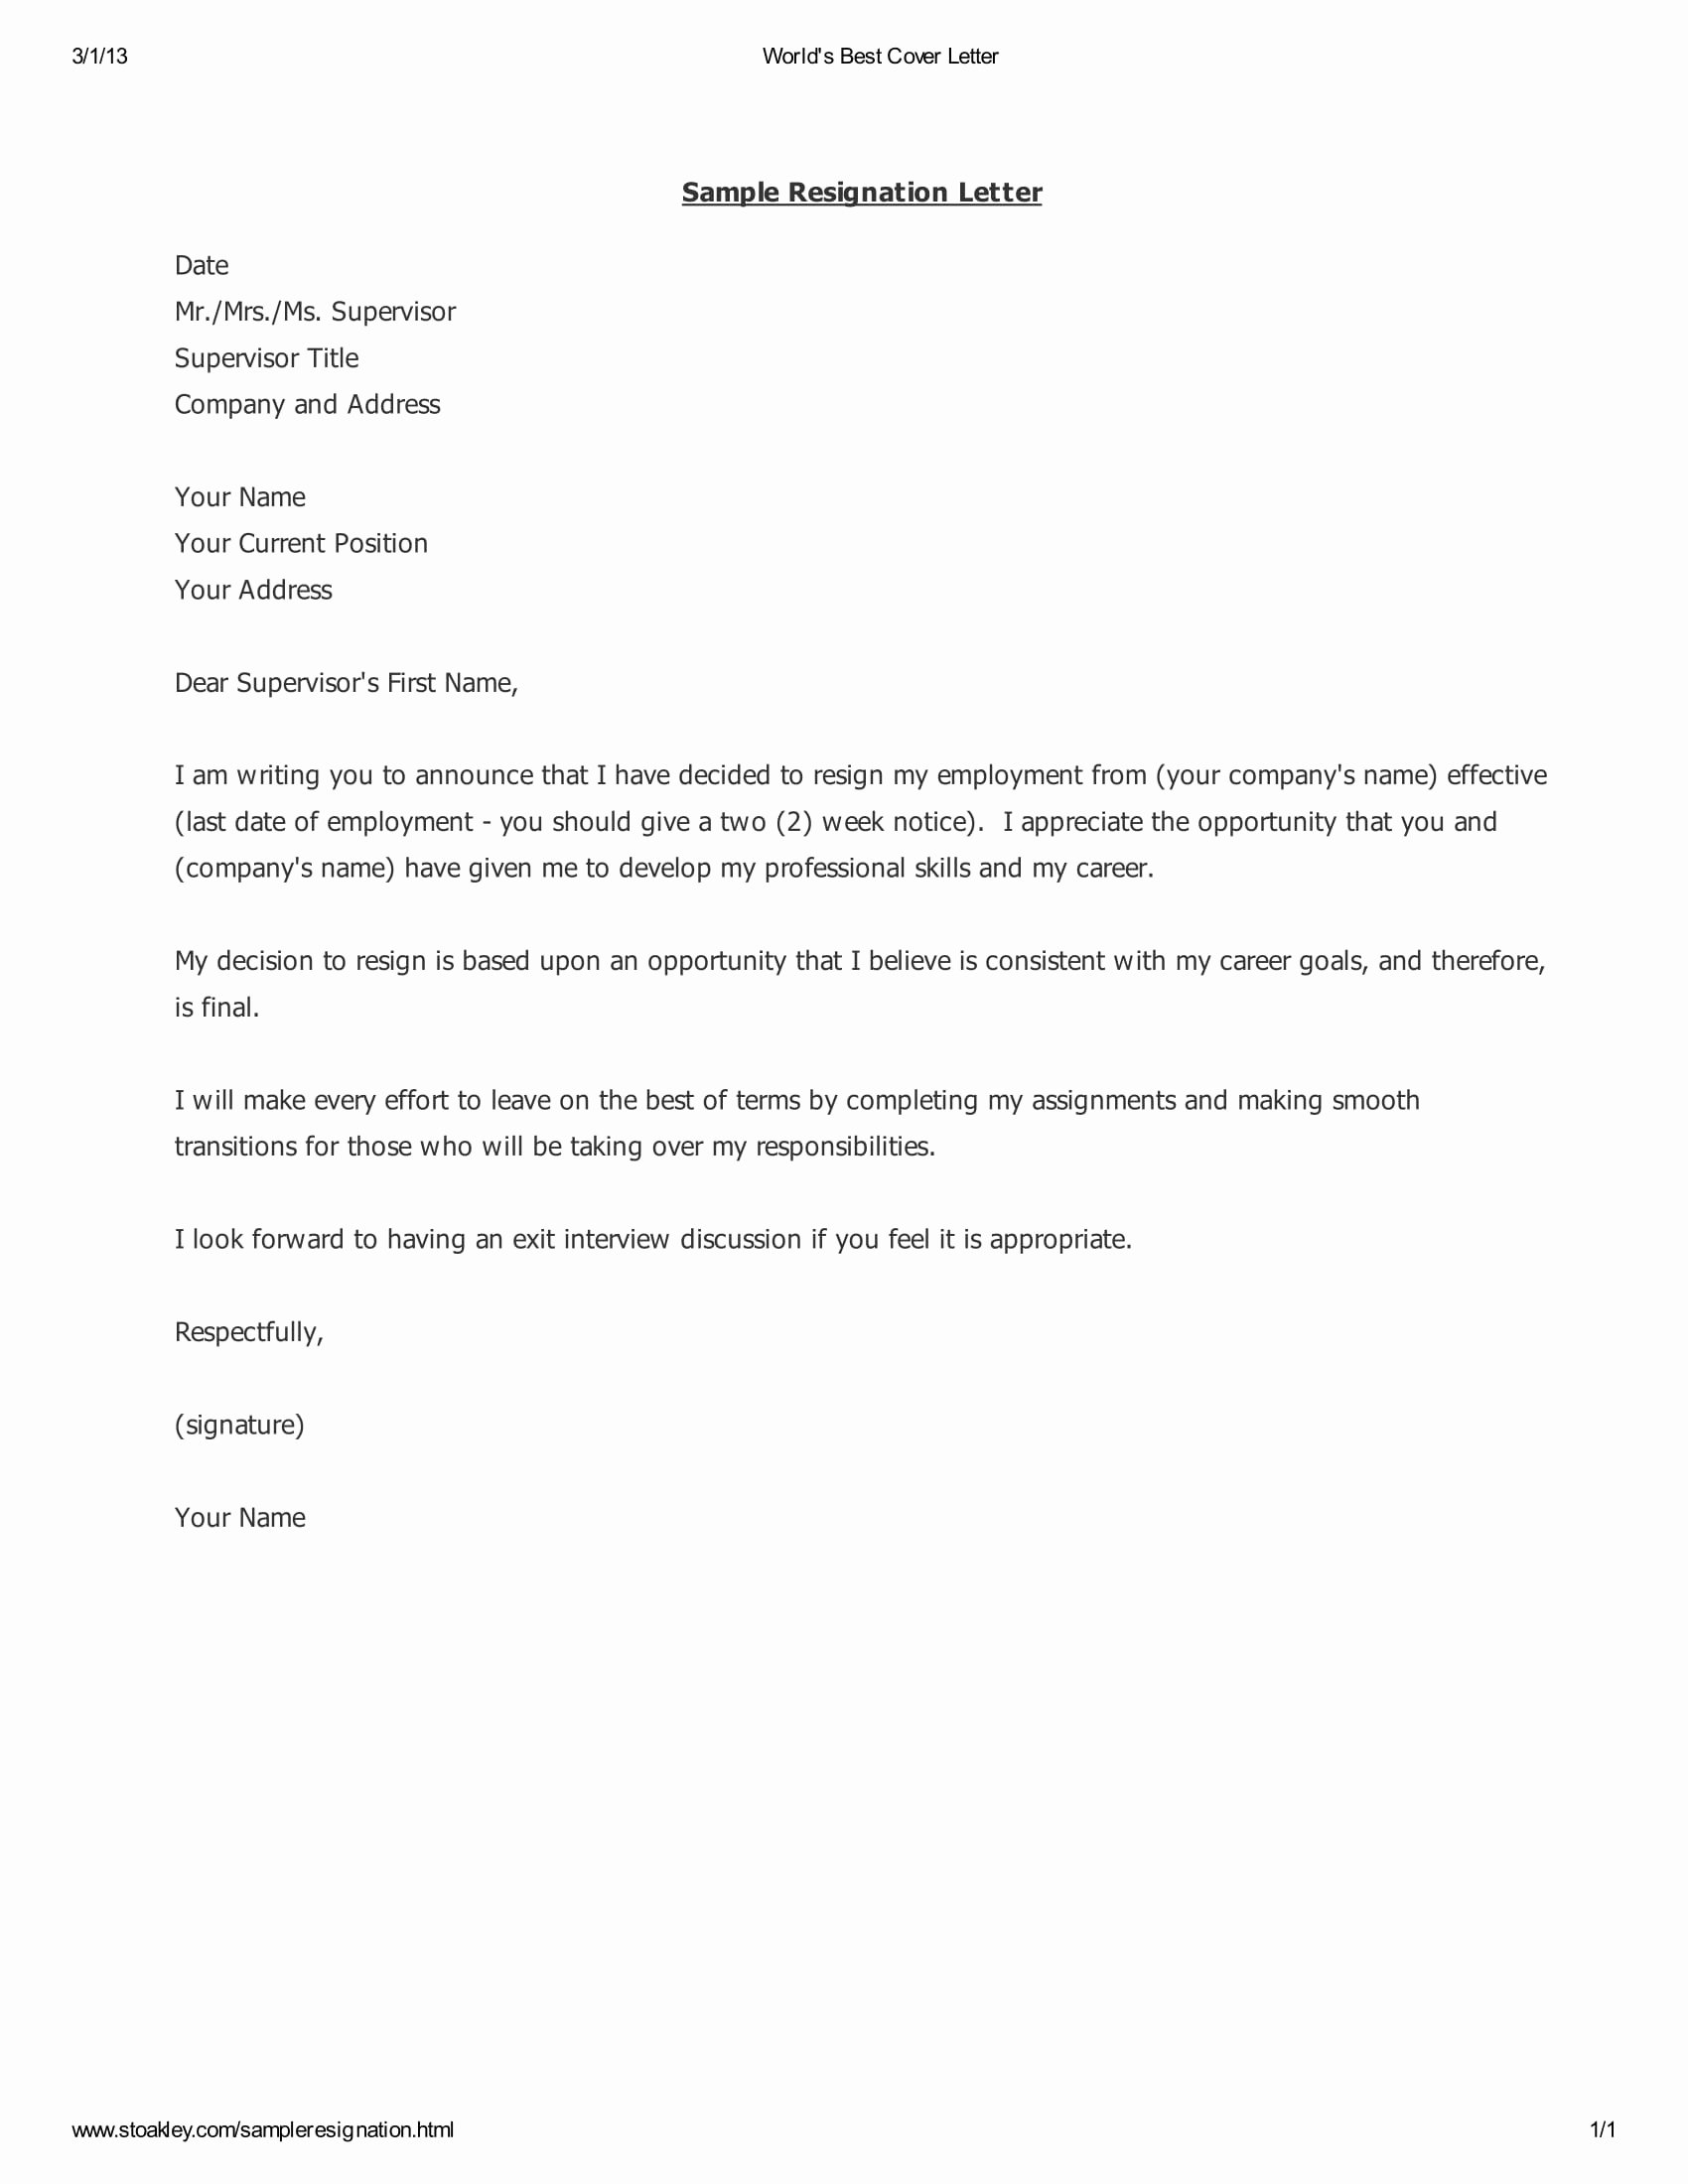 Resignation Letter format Pdf Inspirational 25 Simple Resignation Letter Examples Pdf Word